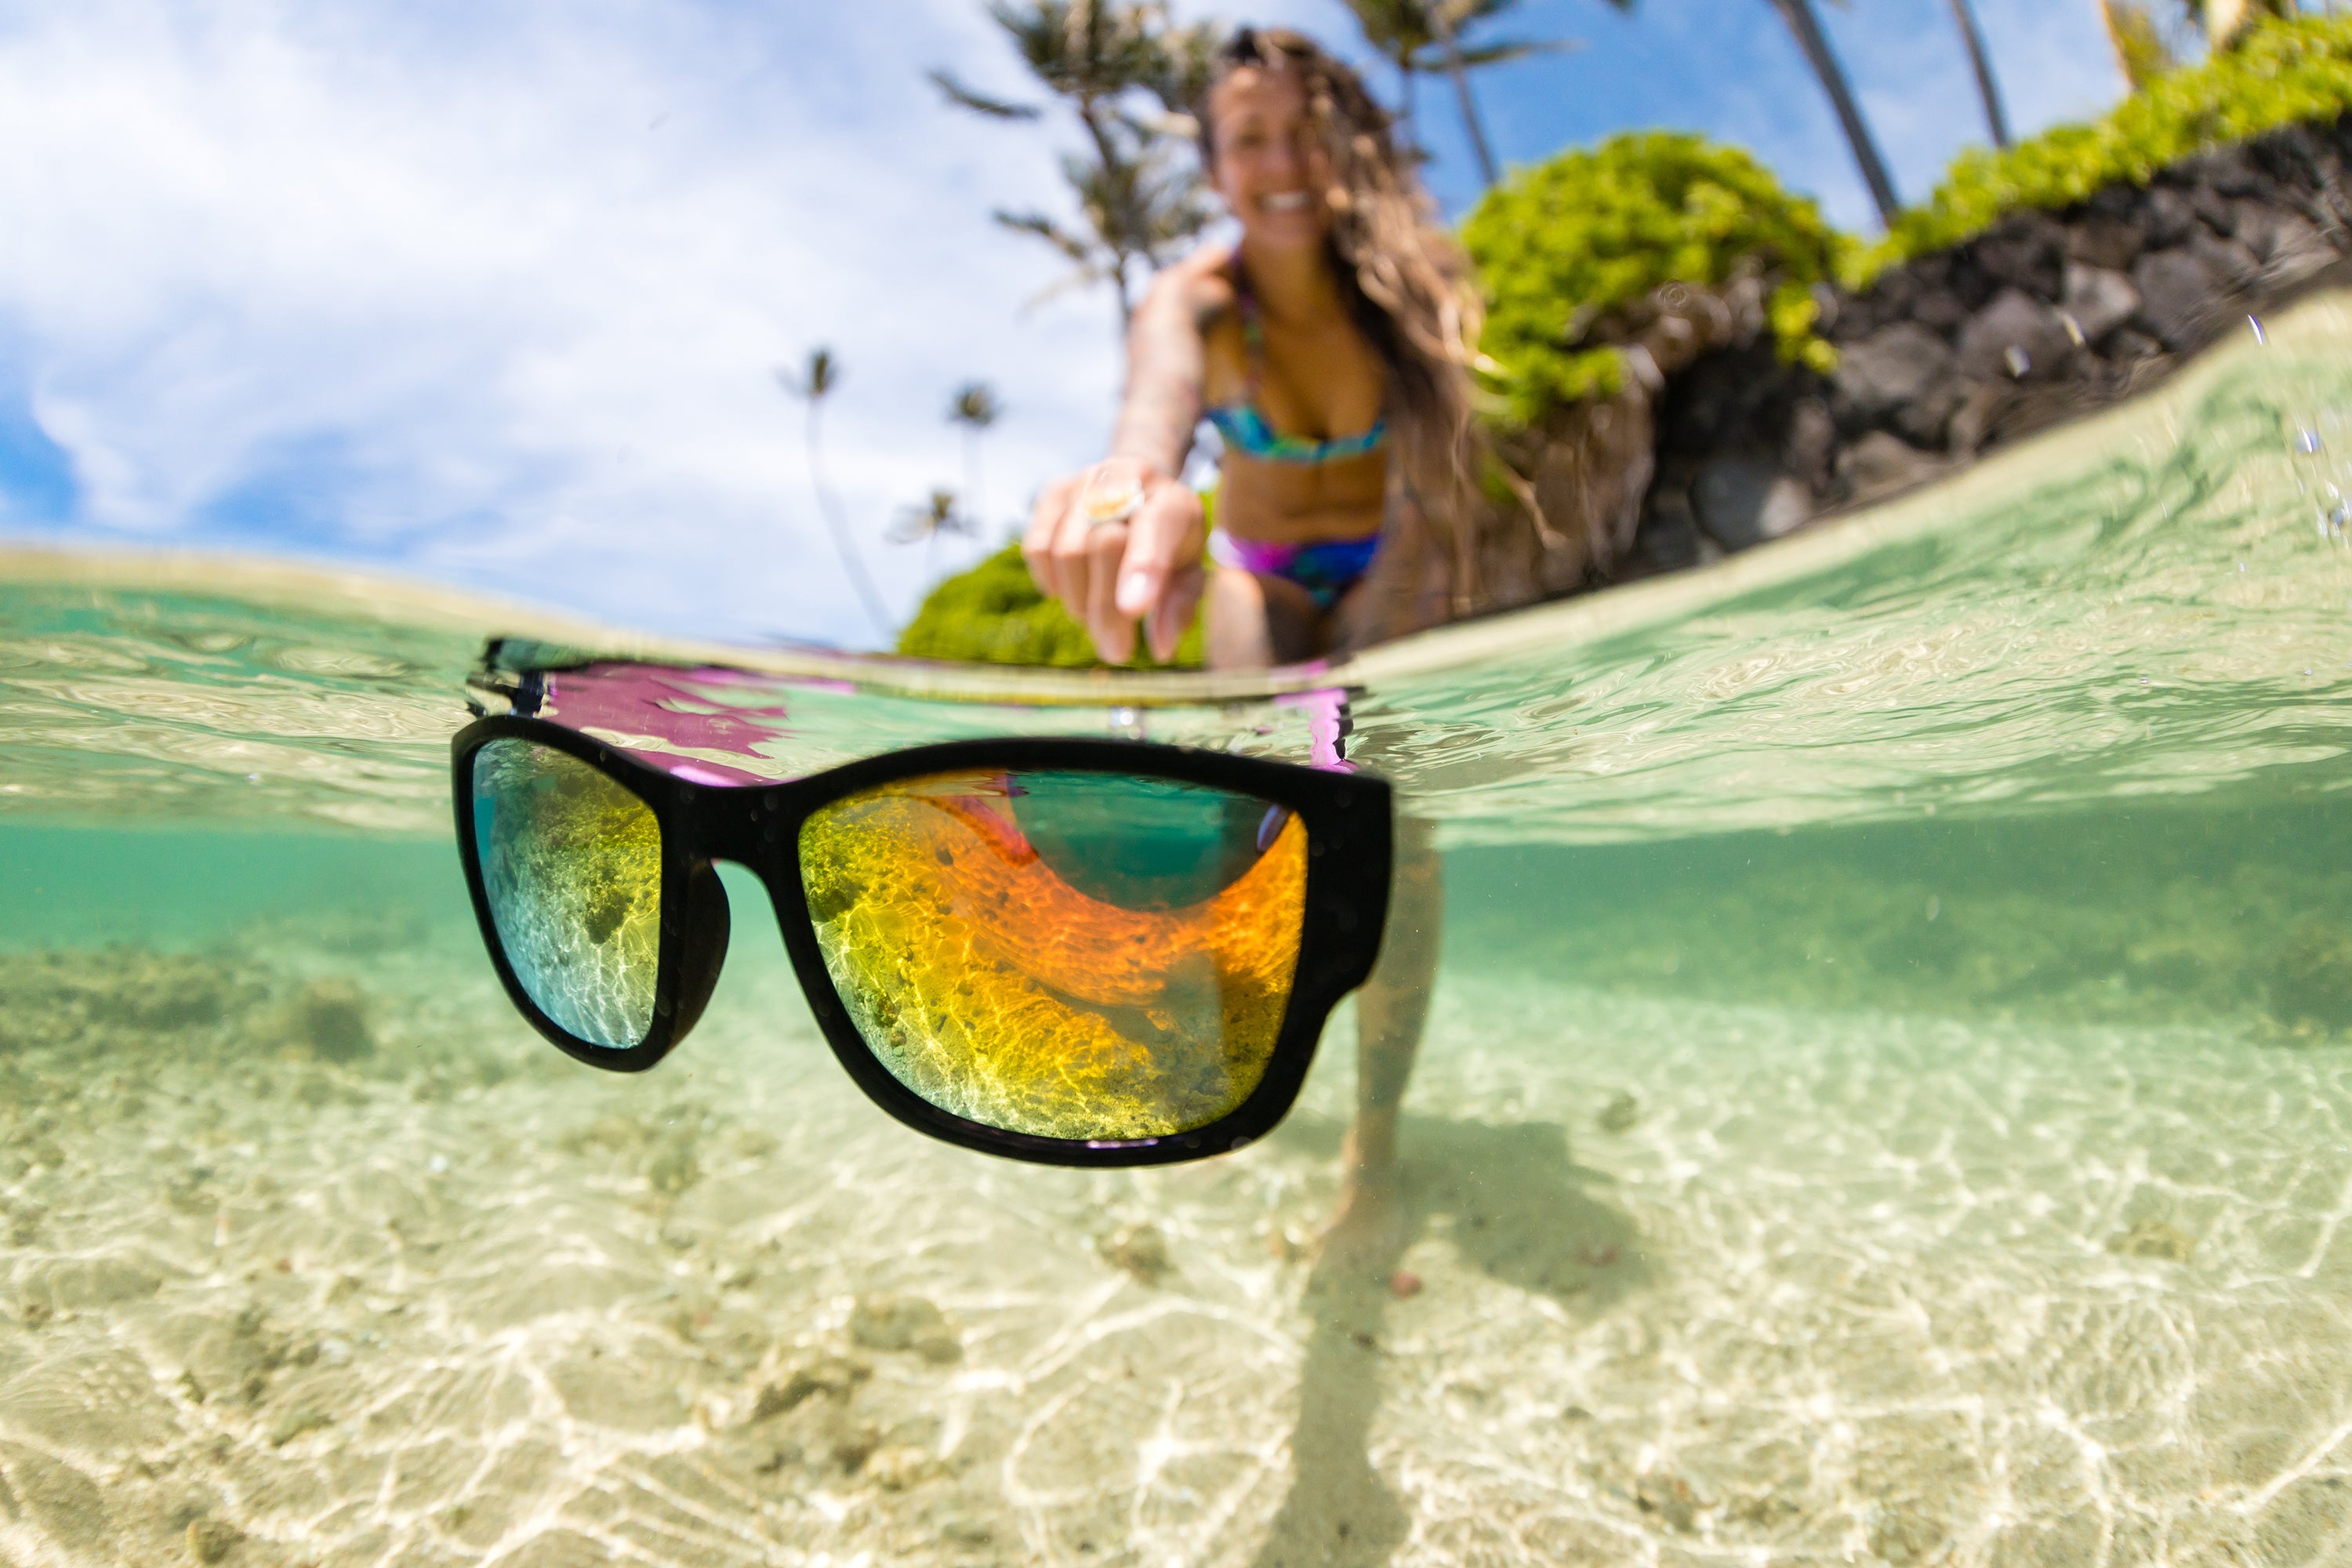 Best Selling Sunglasses That Float in Water